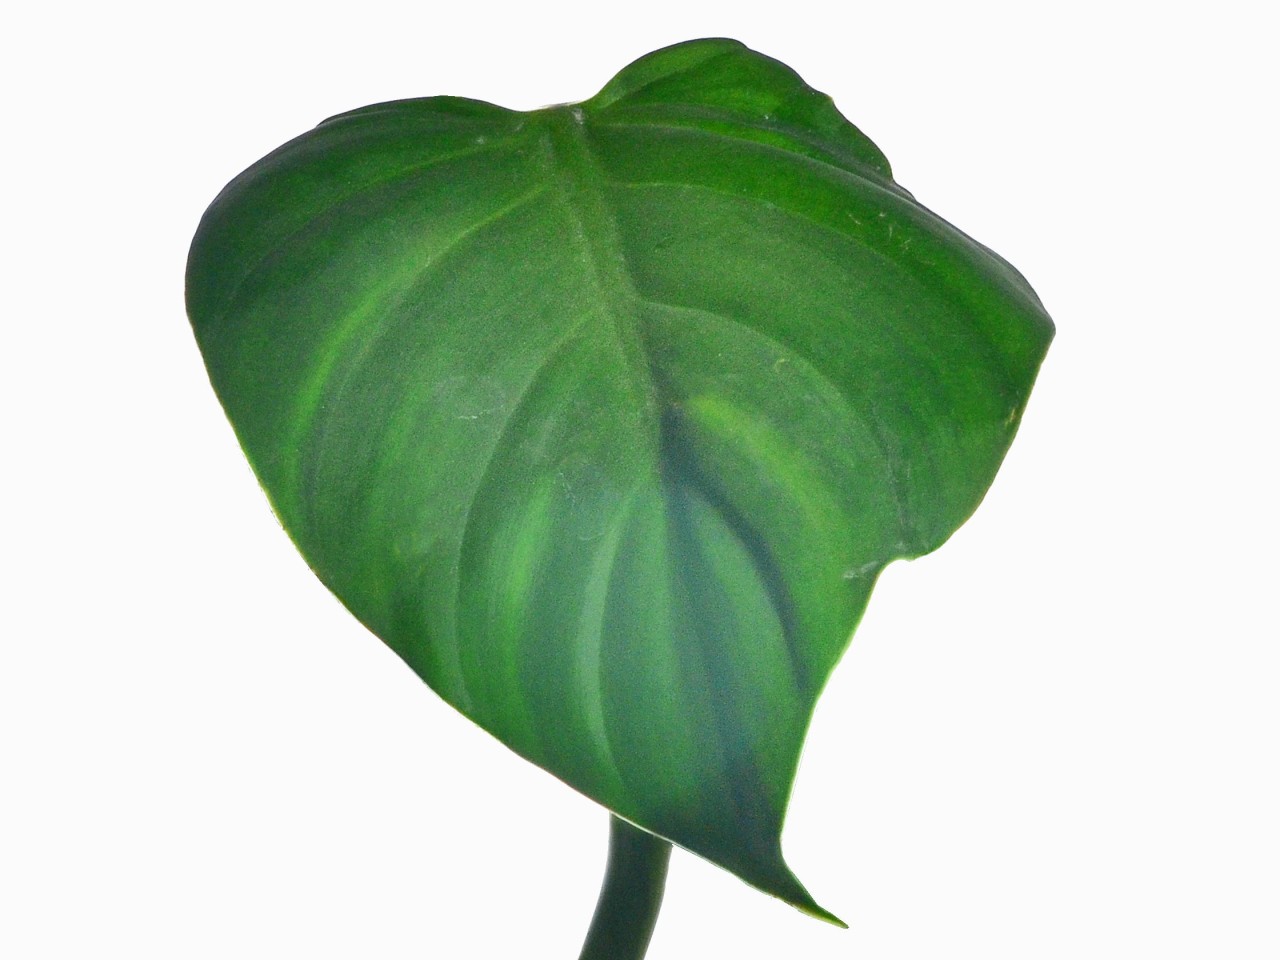 Philodendron atratum (aka Philodendron dodsonii)